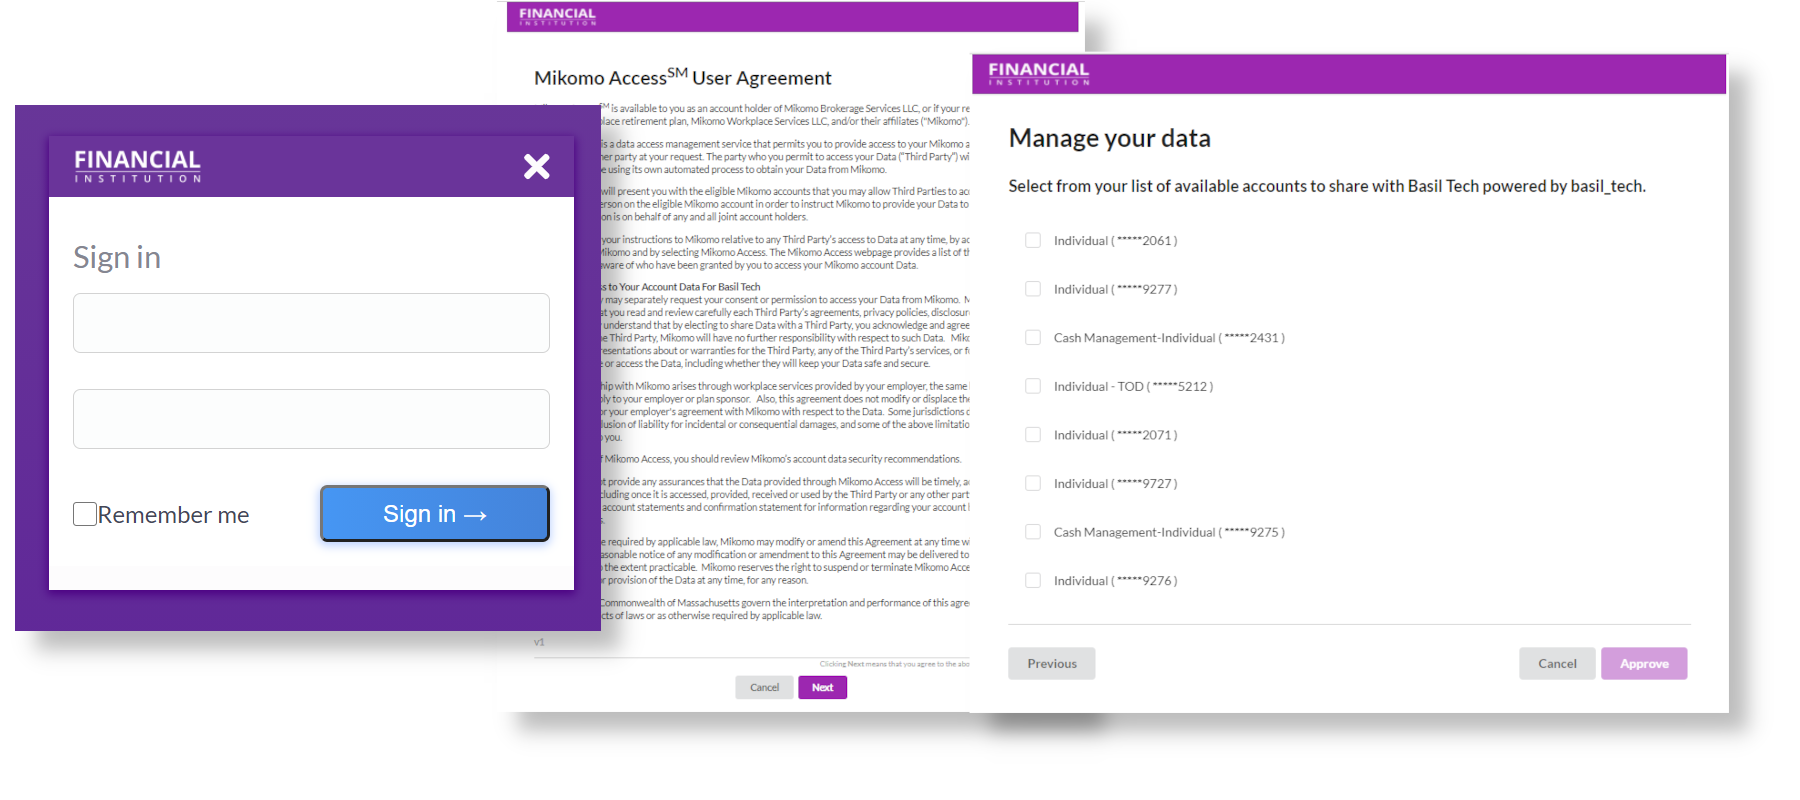 Sign in, accept the user agreement, and select which accounts to share.